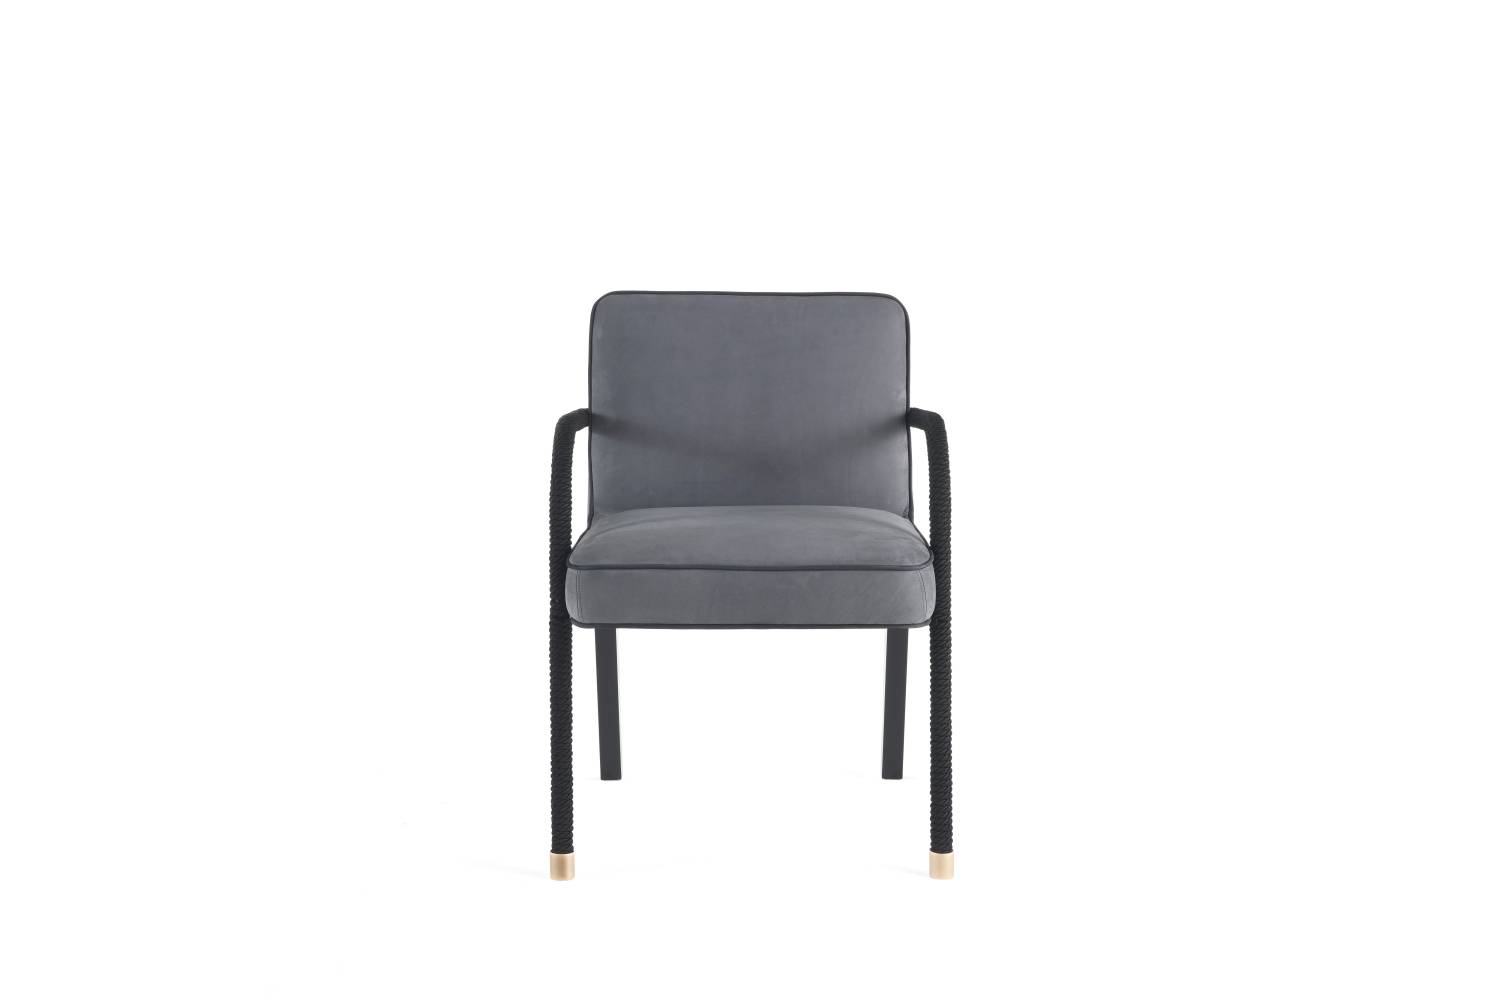 LOOP chair with armrests | Gianfranco Ferré Home Interiors